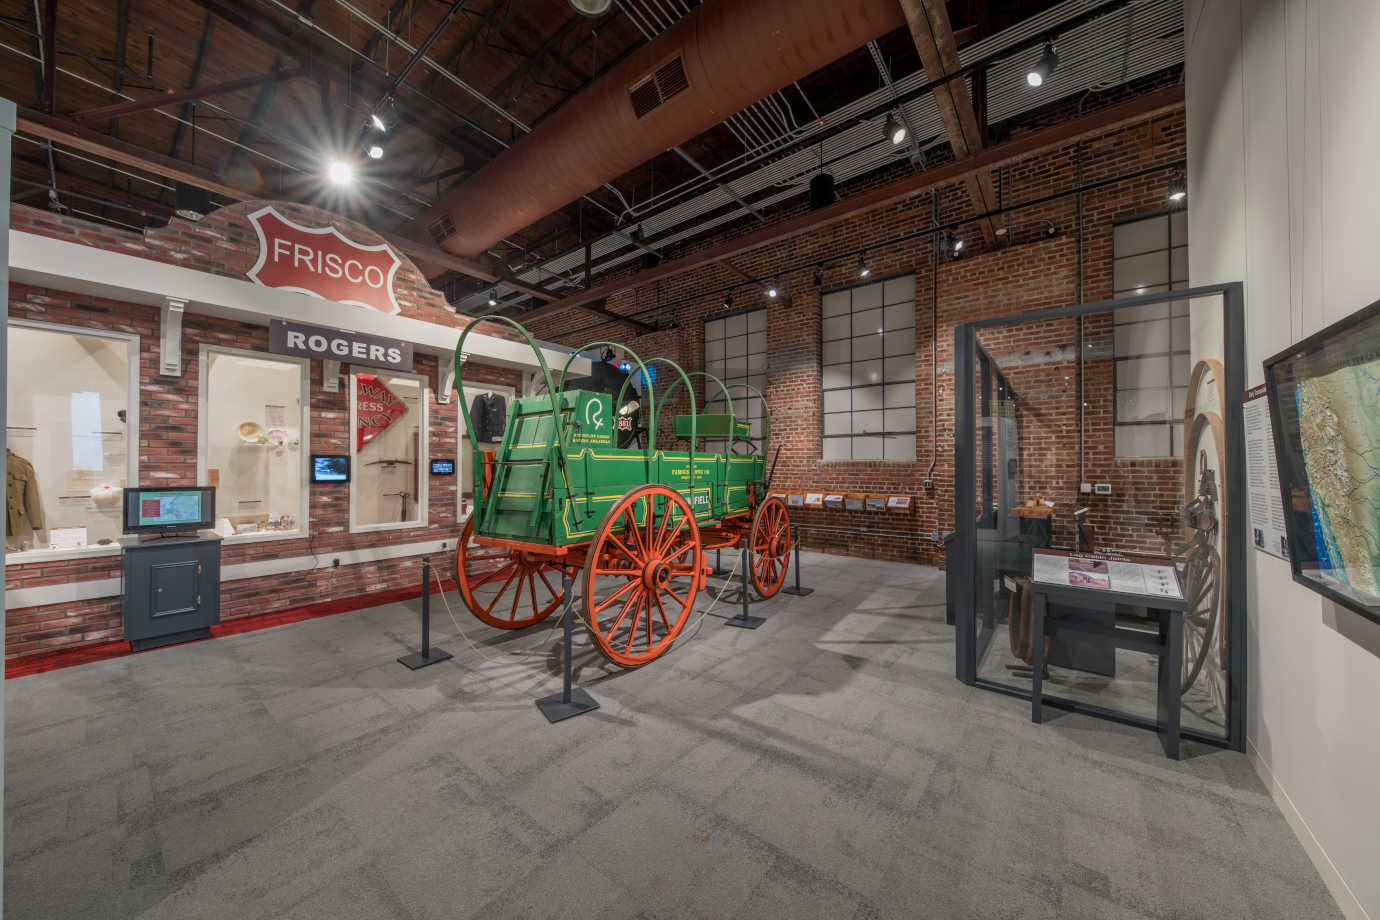 Rogers Historical Museum greatly expanded their capacity to host permanent and traveling exhibitions. Image courtesy of the museum.